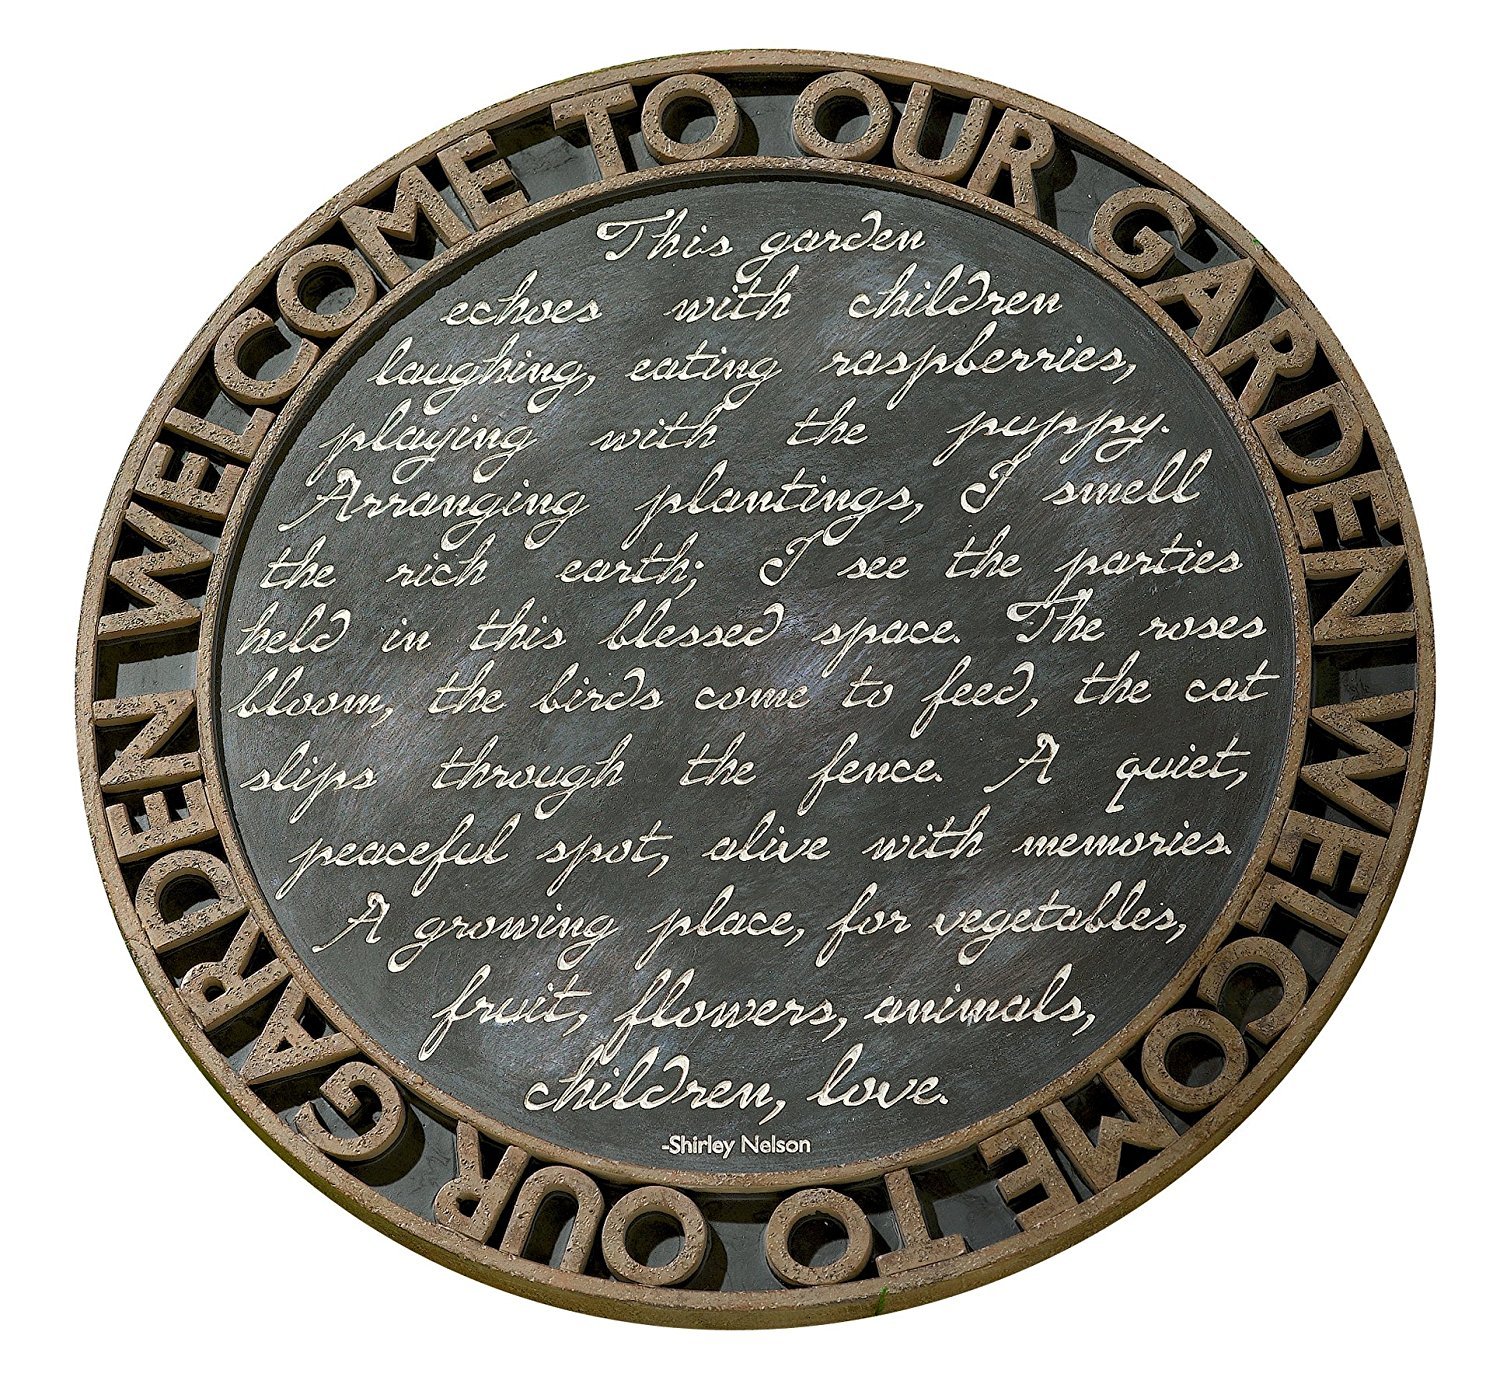 Grasslands Road Estate "Welcome to Our Garden" Script Motif Stepping Stone Plaque with Metal Stand - image 1 of 2